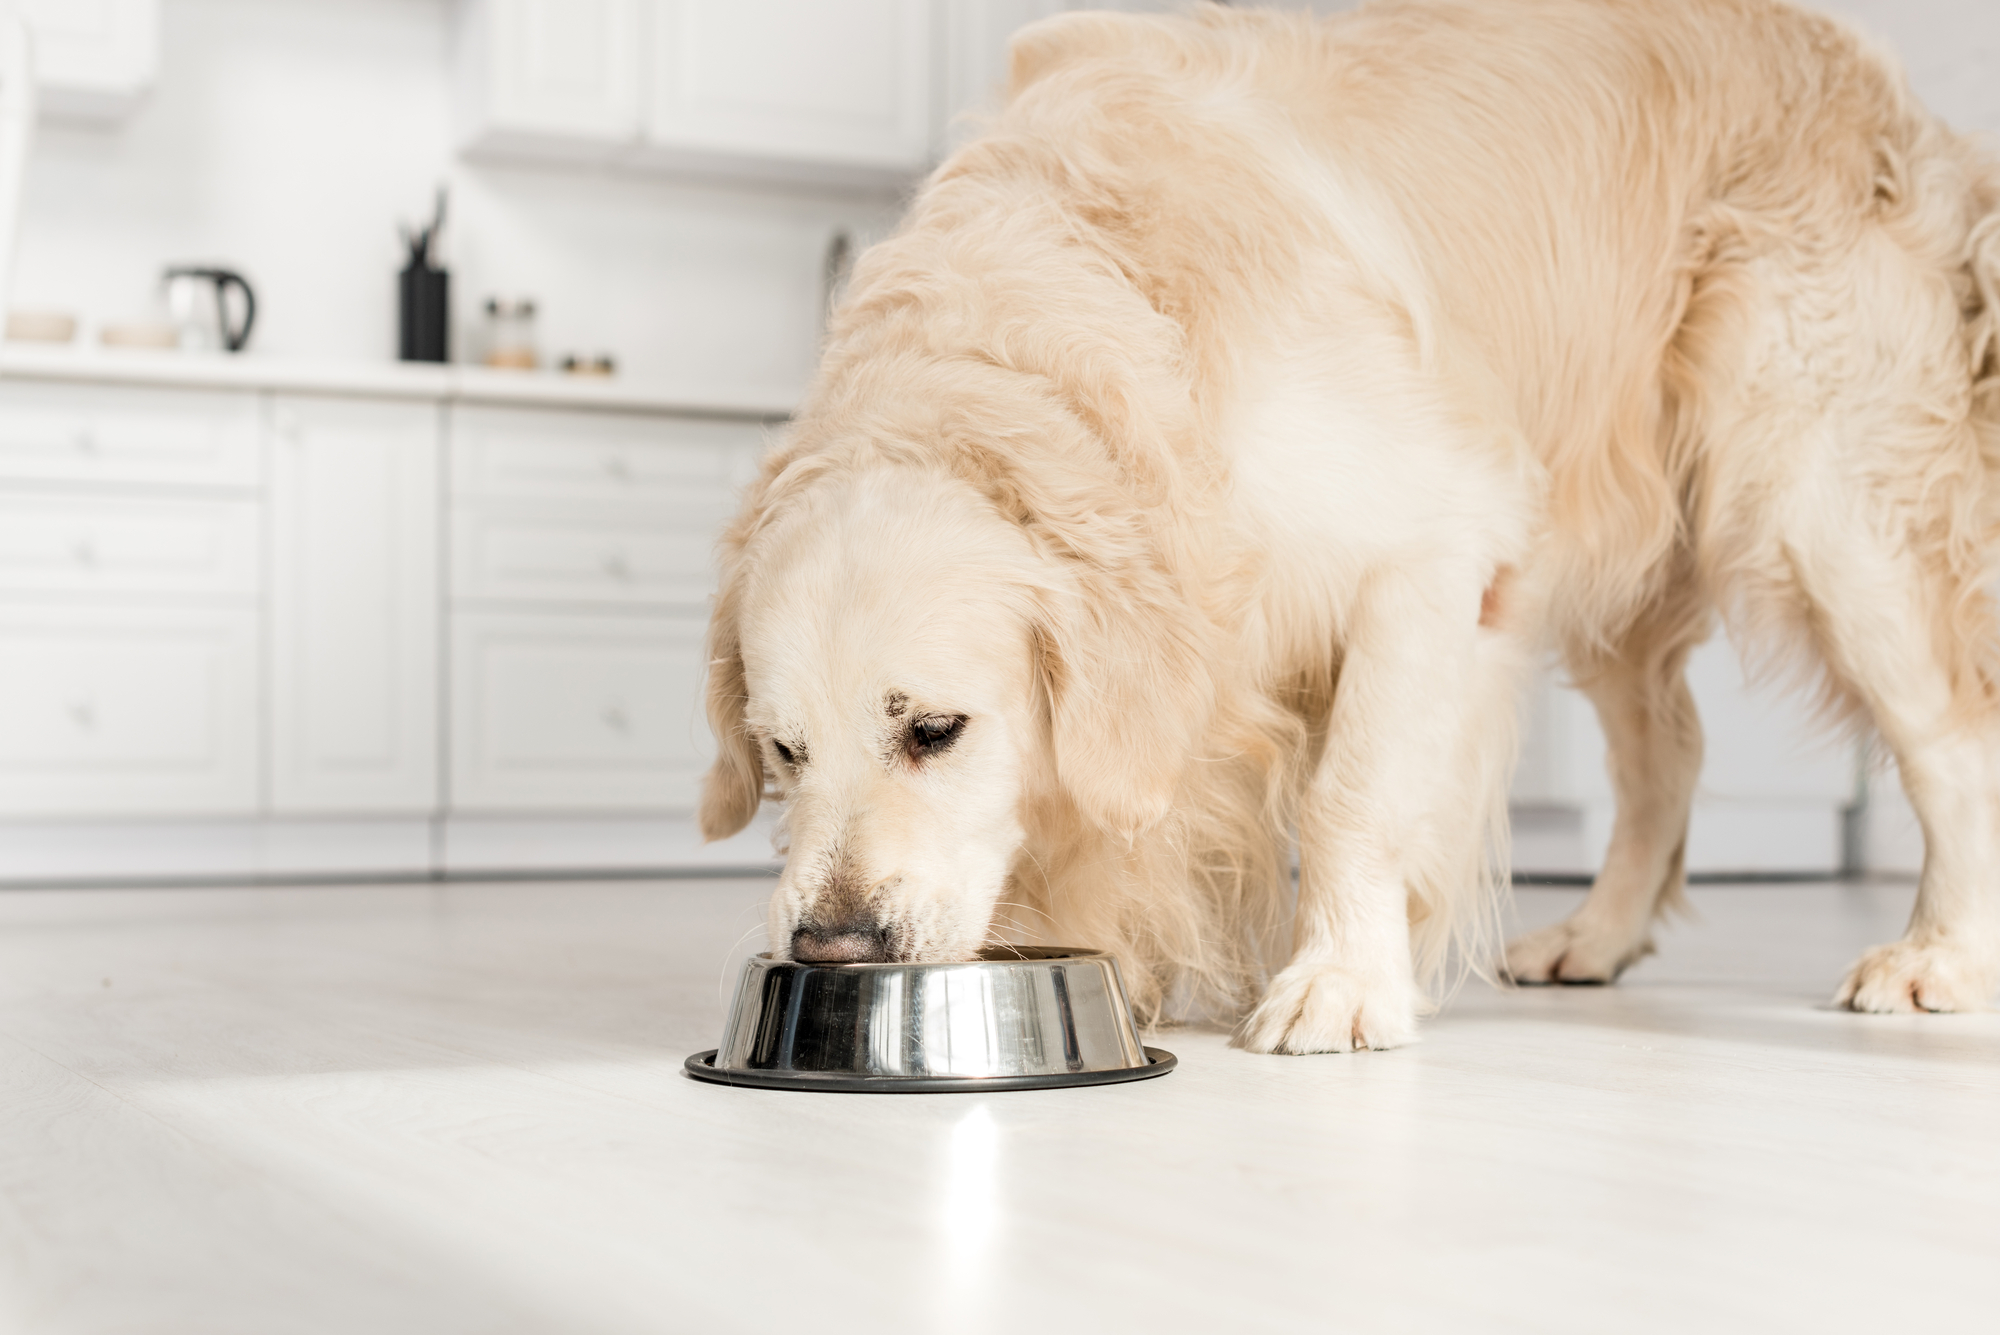 if a dog eats to fast it can lead to vomiting, gagging, choking and even dog bloat